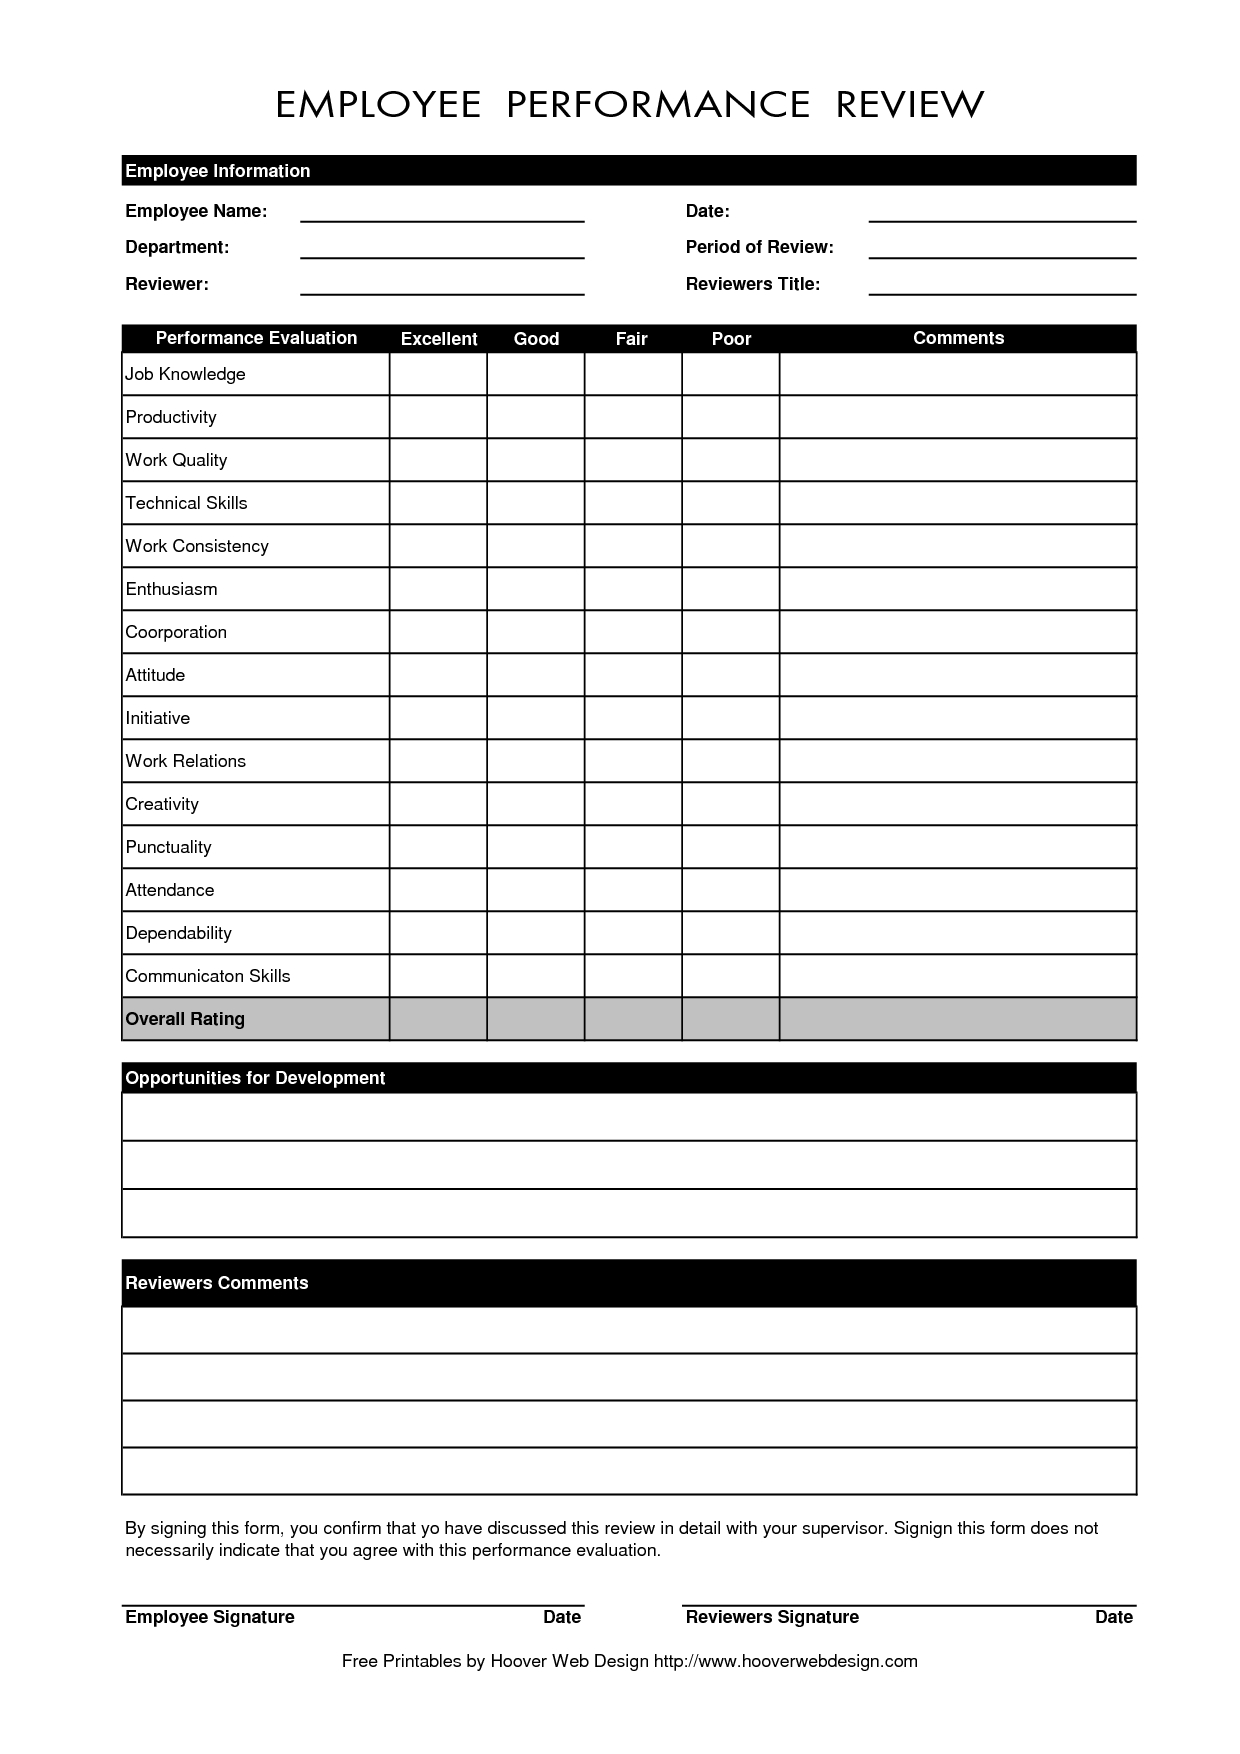 Free Employee Performance Review Forms  Excel  Employee for Staff Progress Report Template